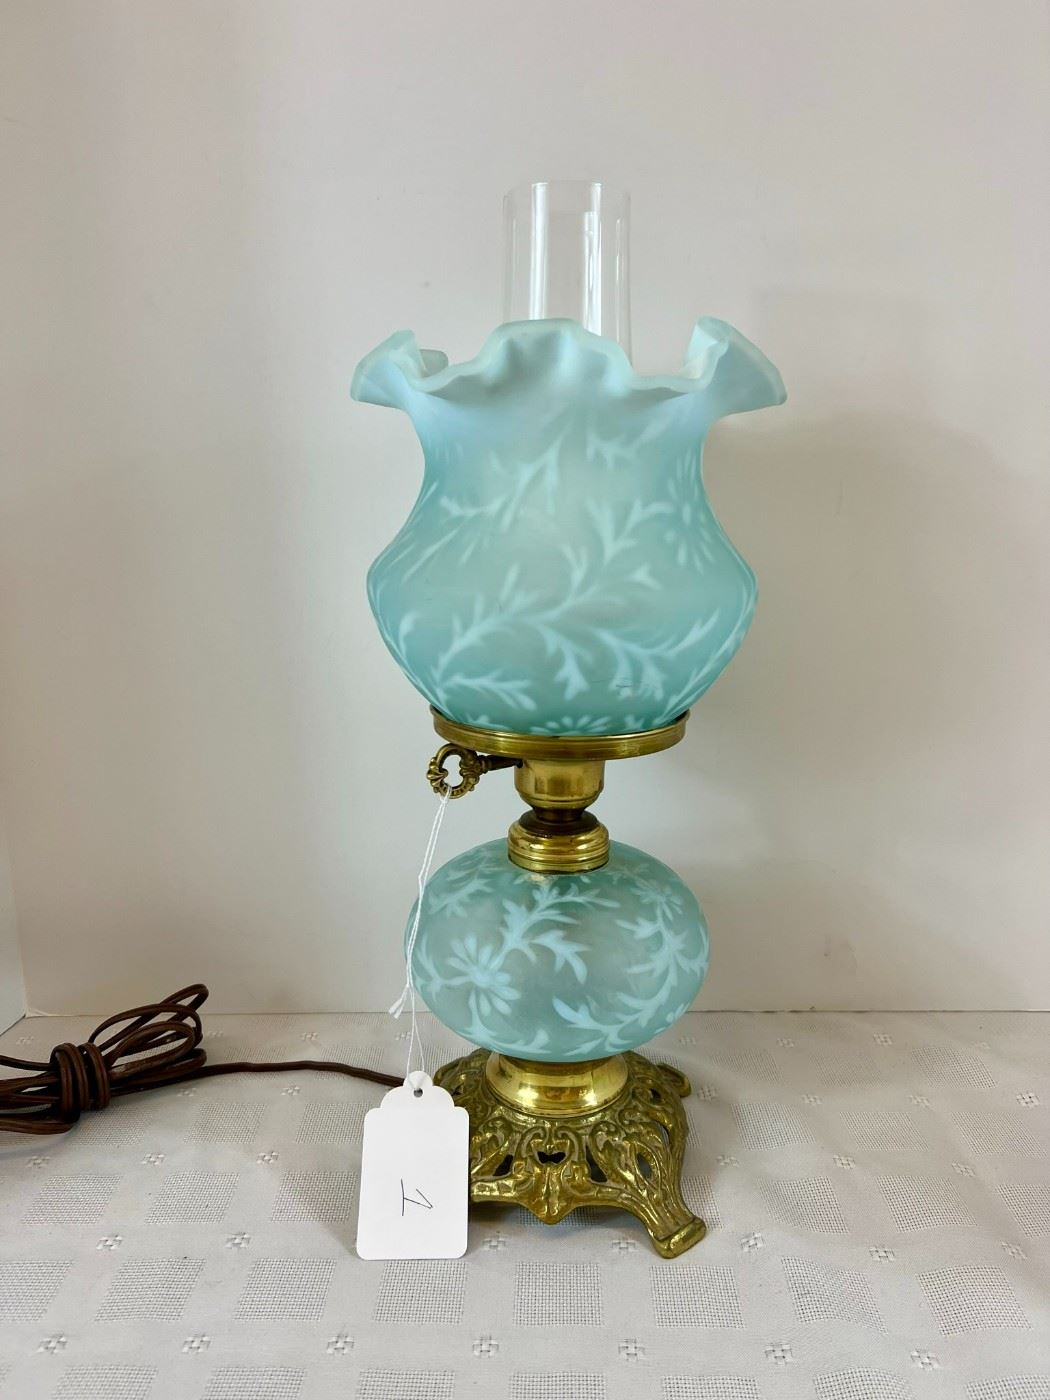 Lot 1 FENTON for L.G.WRIGHT GLASS Blue satin Daisy and Fern Opalescent Gone With The Wind Lamp
